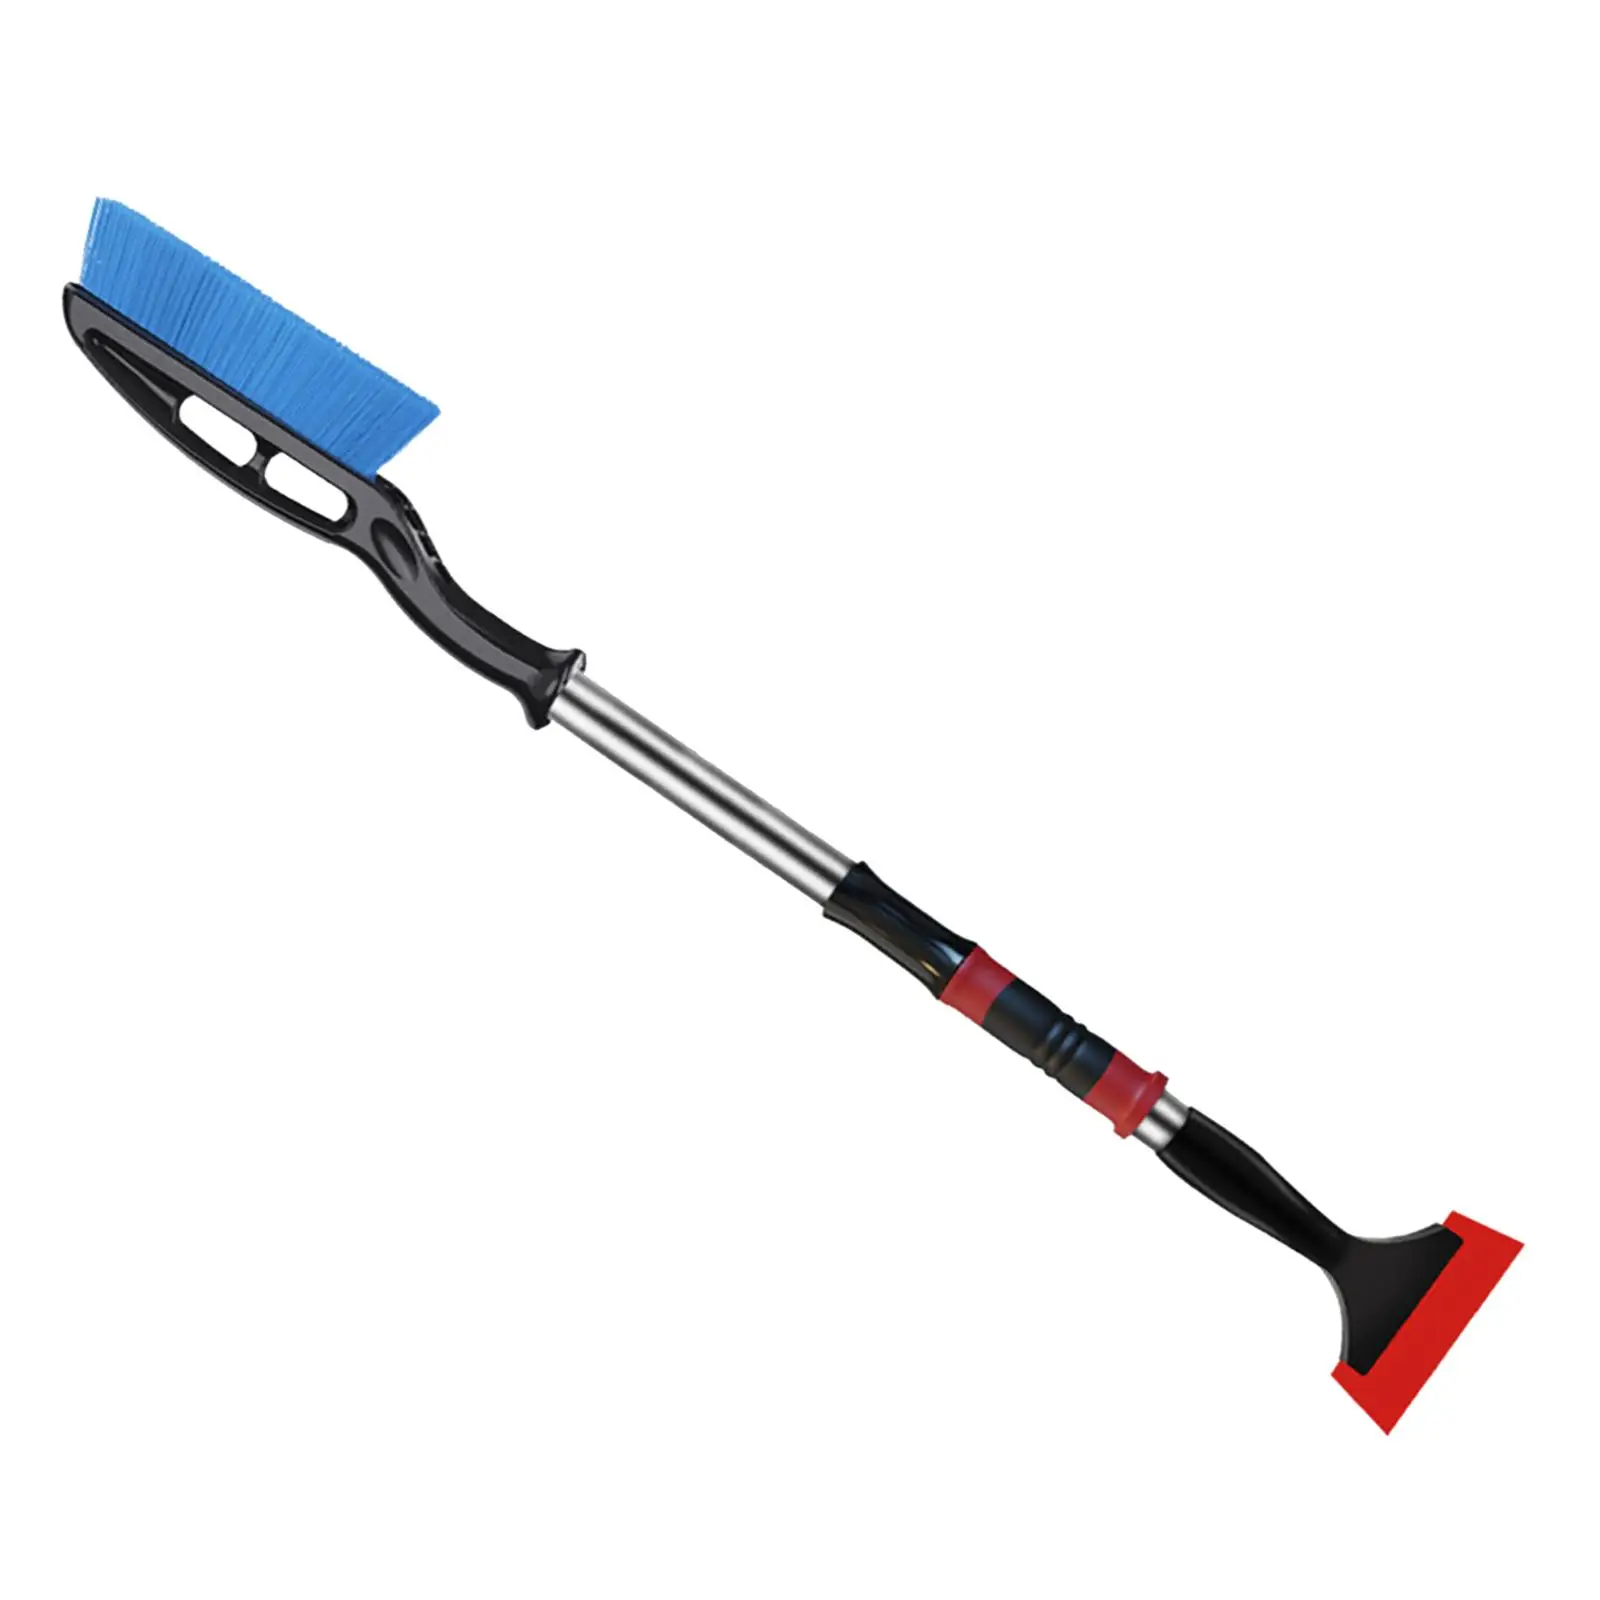 Car Snow Shovel Brush Tool Extendable Rod Winter Multipurpose Universal Snow Removal Snow Remover for Auto Truck SUV Car